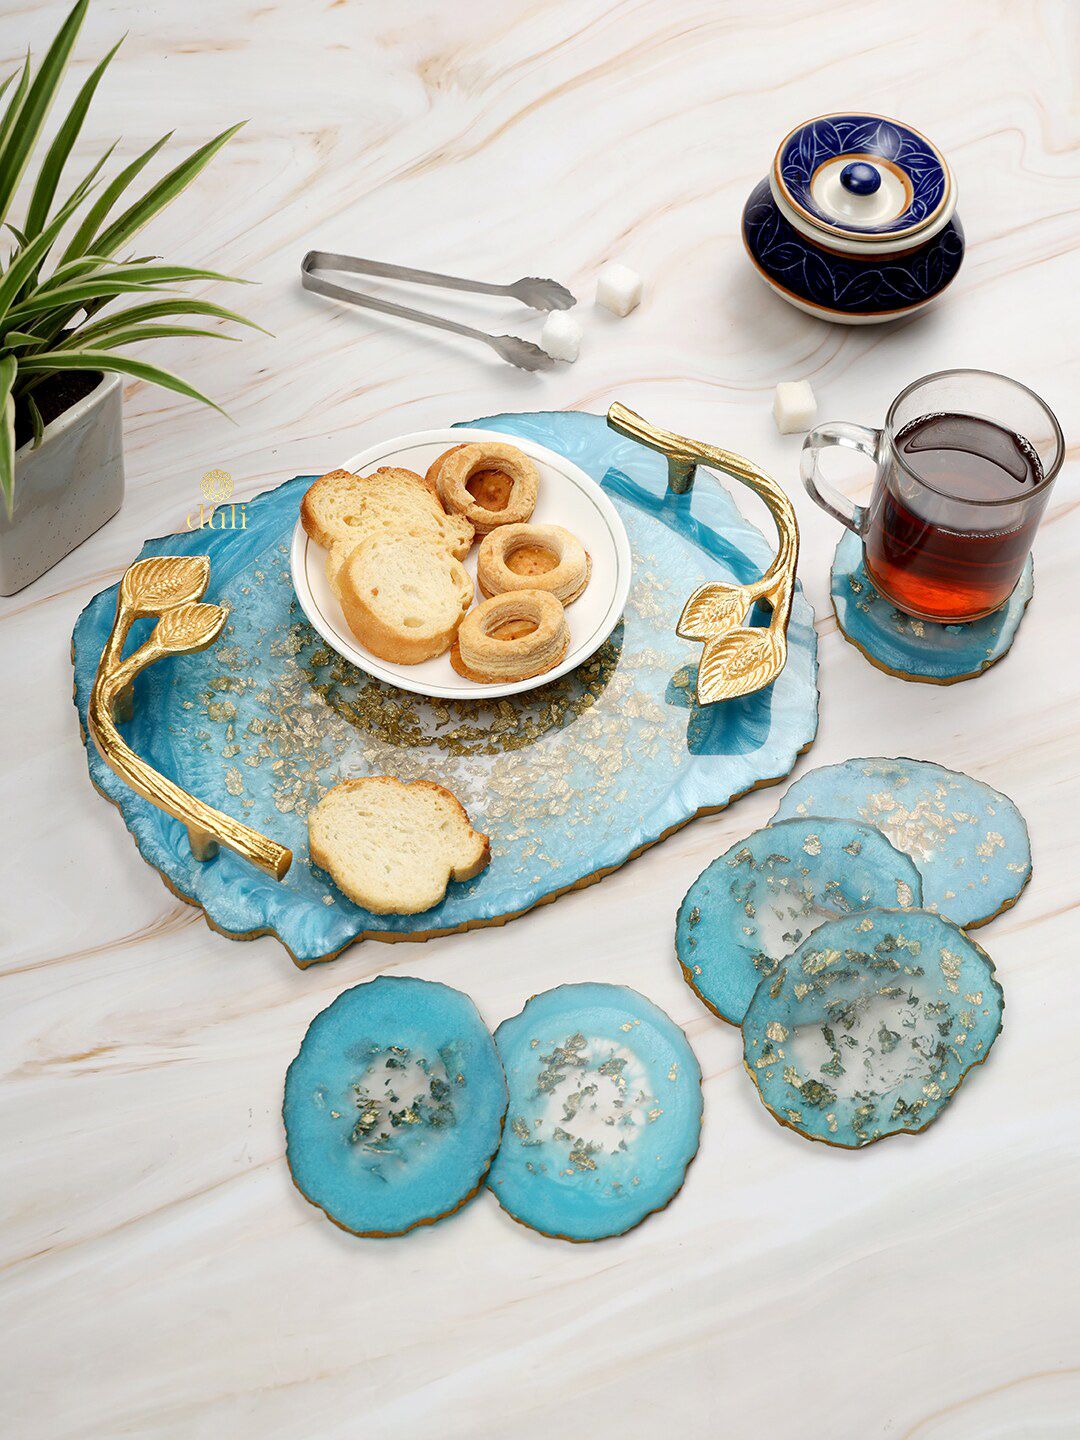 DULI Blue Resin Serving Tray Platter with 6 Pcs Oval Coasters Price in India